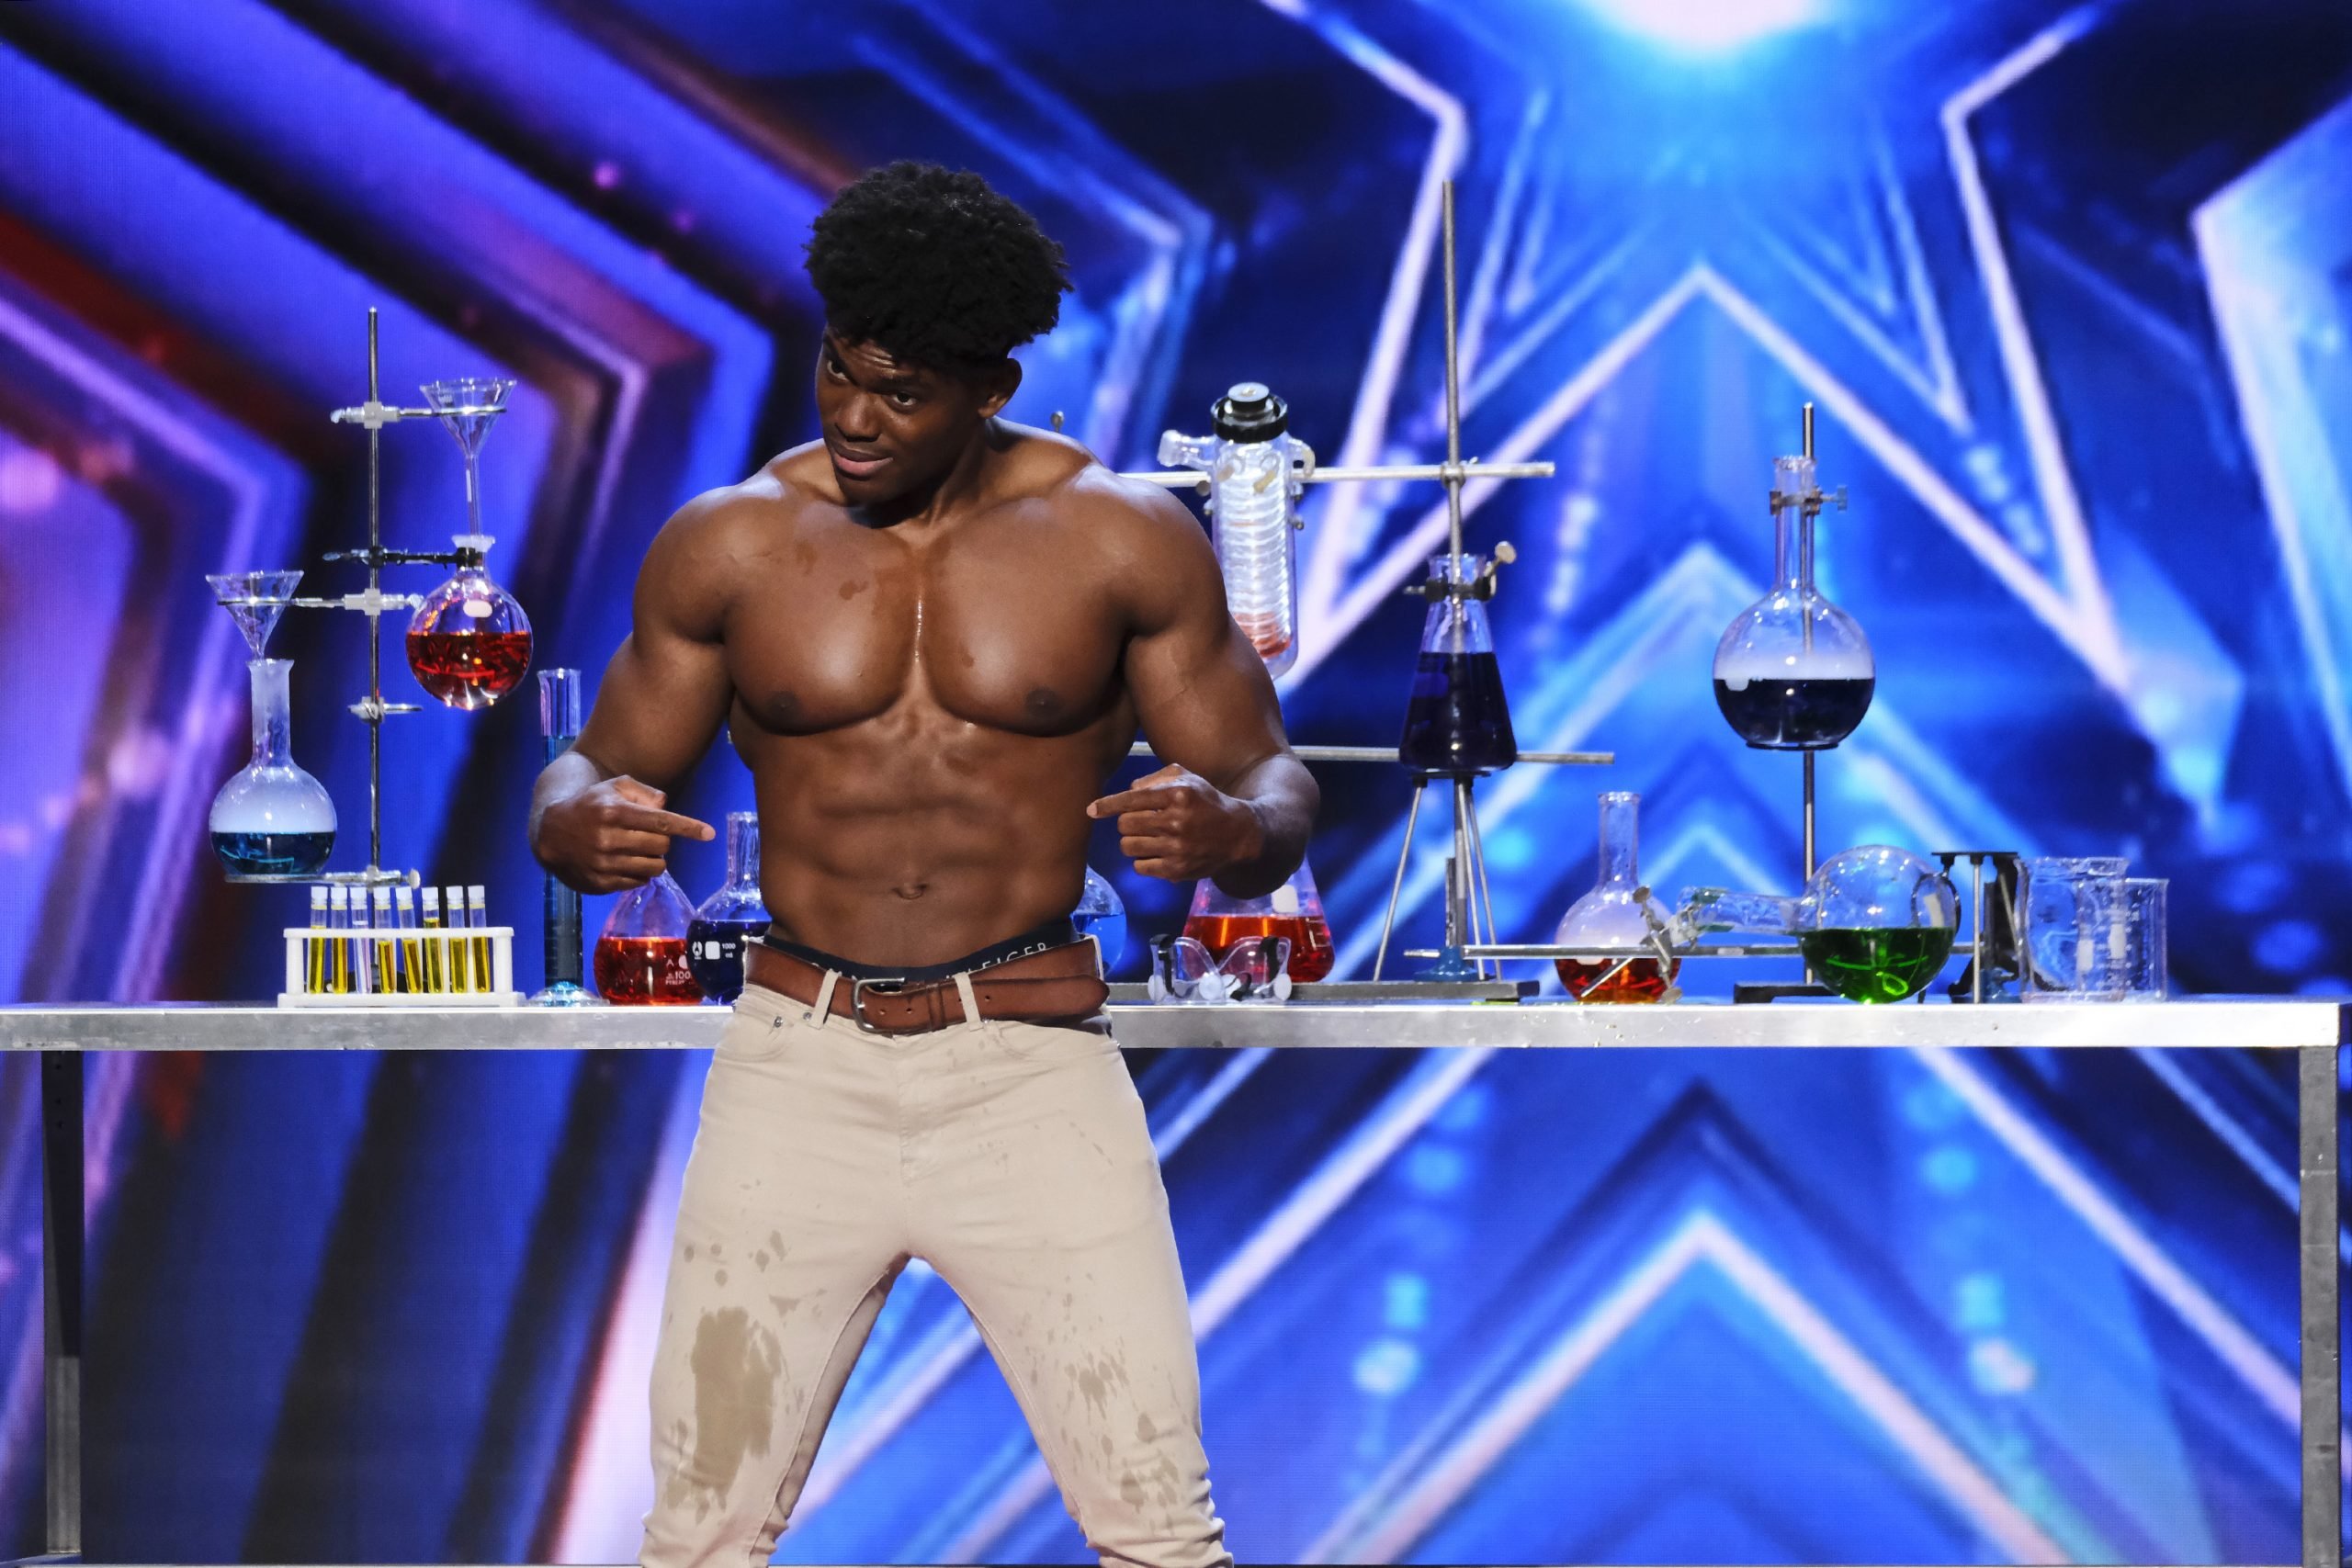 Marvin Achi with his shirt off pointing to his abs in an audition for 'America's Got Talent' Season 17